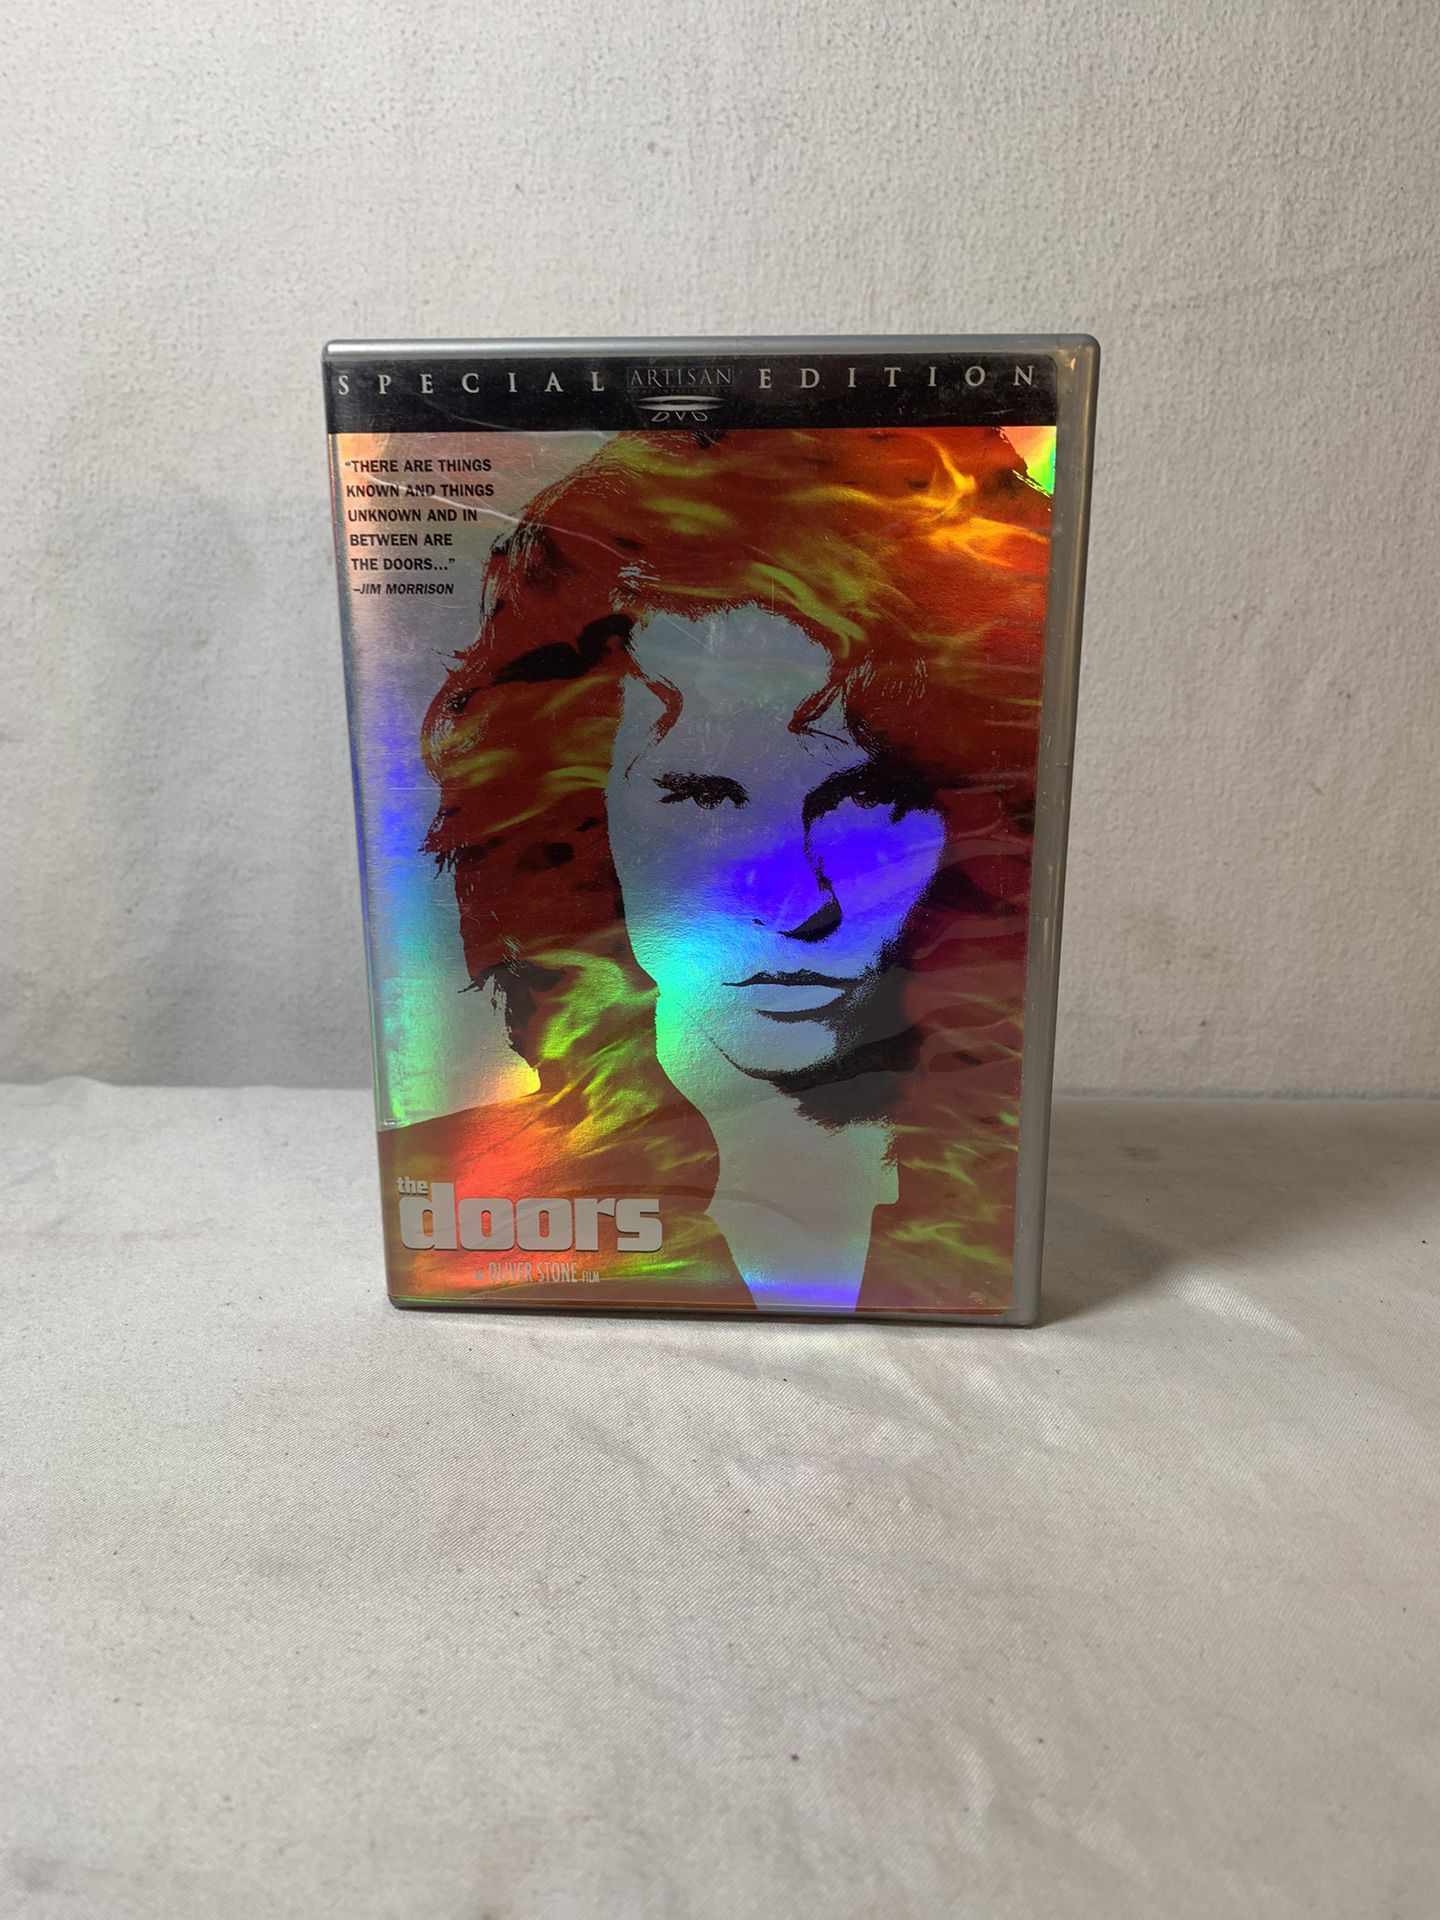 The Doors - Special Edition (DVD, 2000, 2-Disc Set)